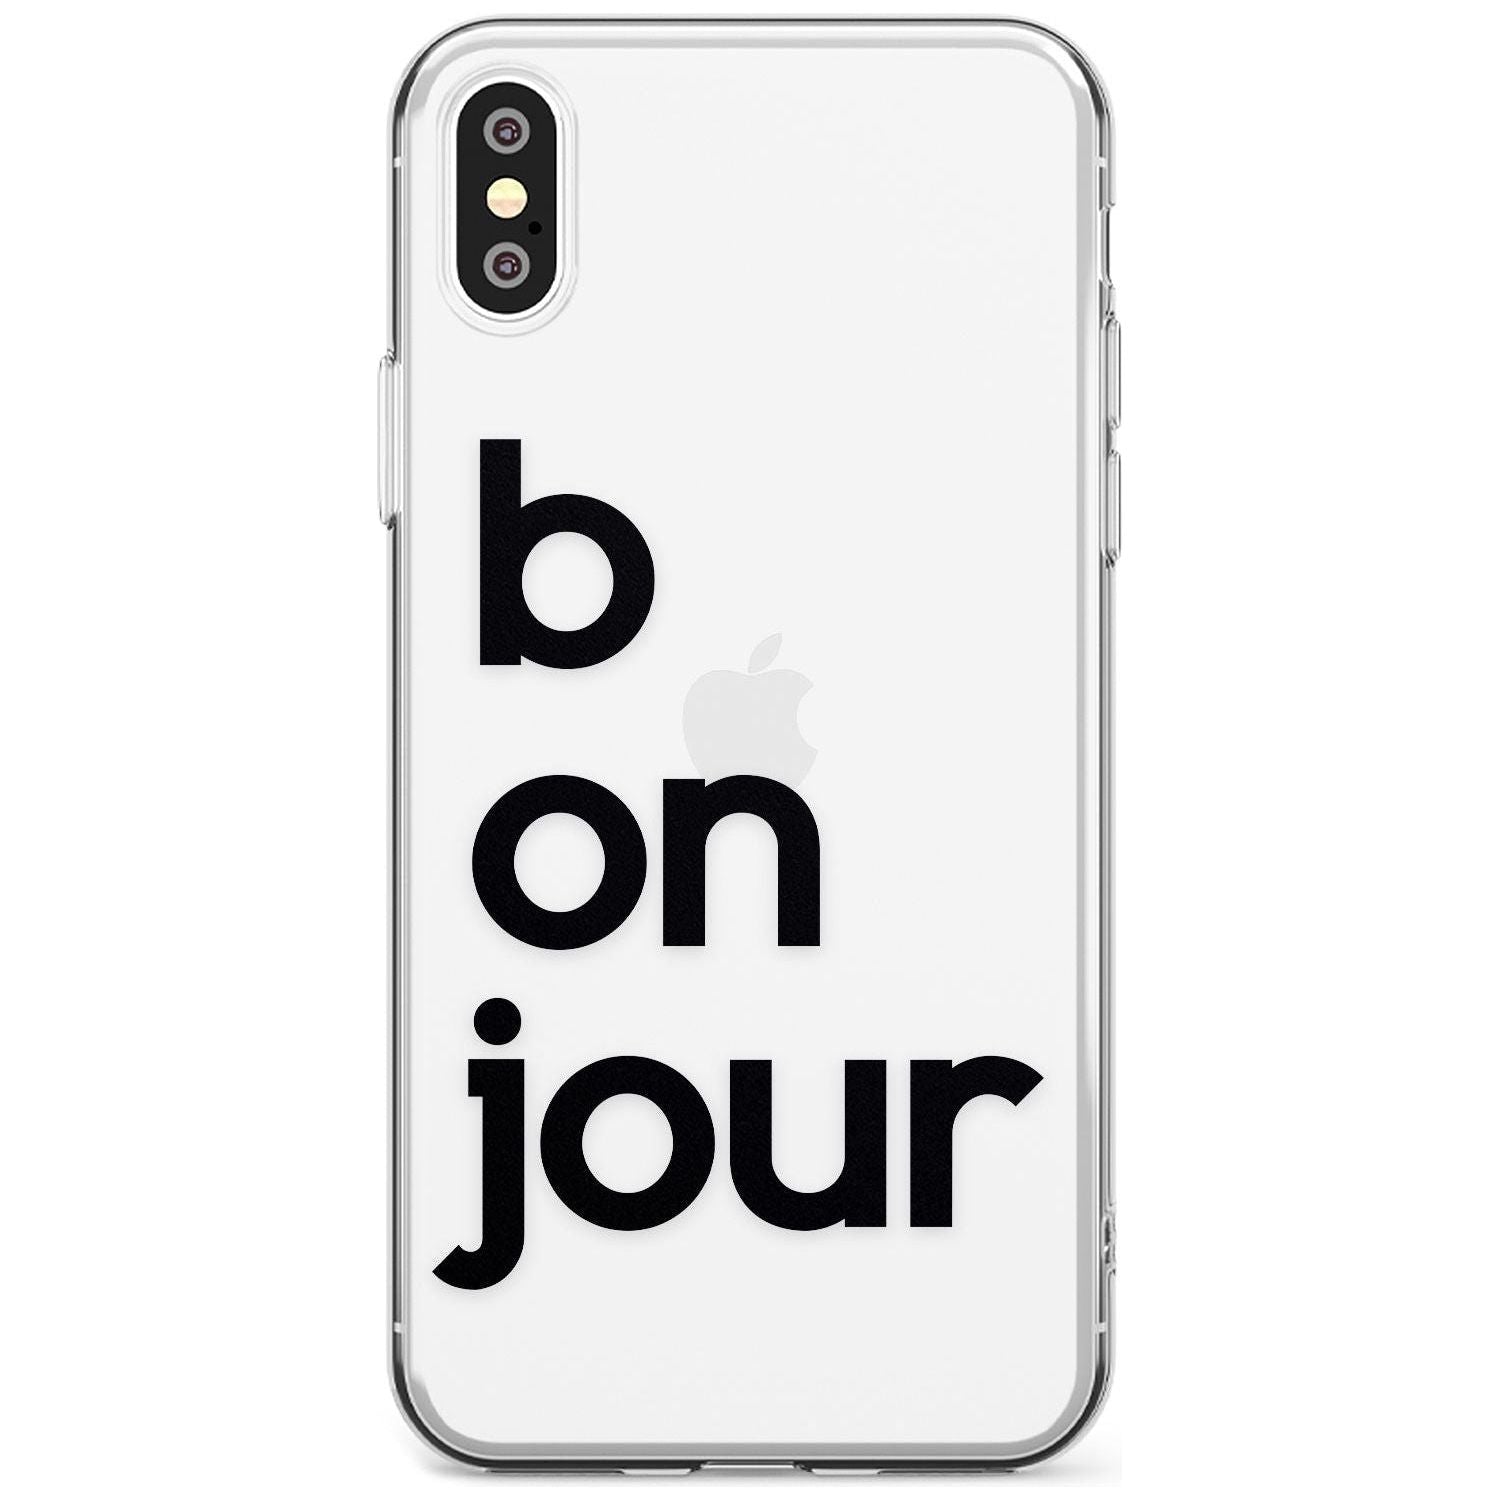 Bonjour Black Impact Phone Case for iPhone X XS Max XR